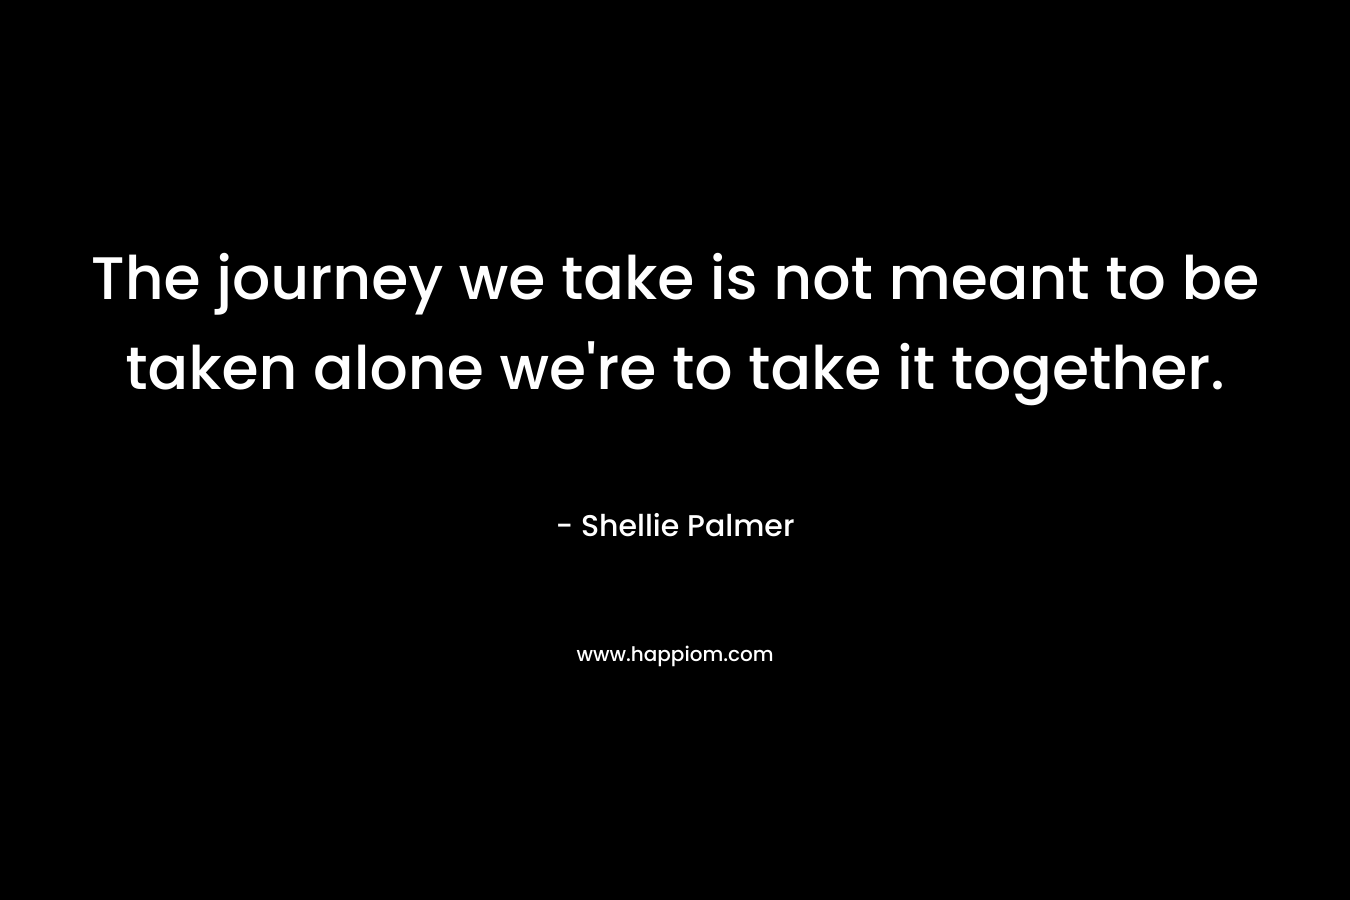 The journey we take is not meant to be taken alone we’re to take it together. – Shellie Palmer